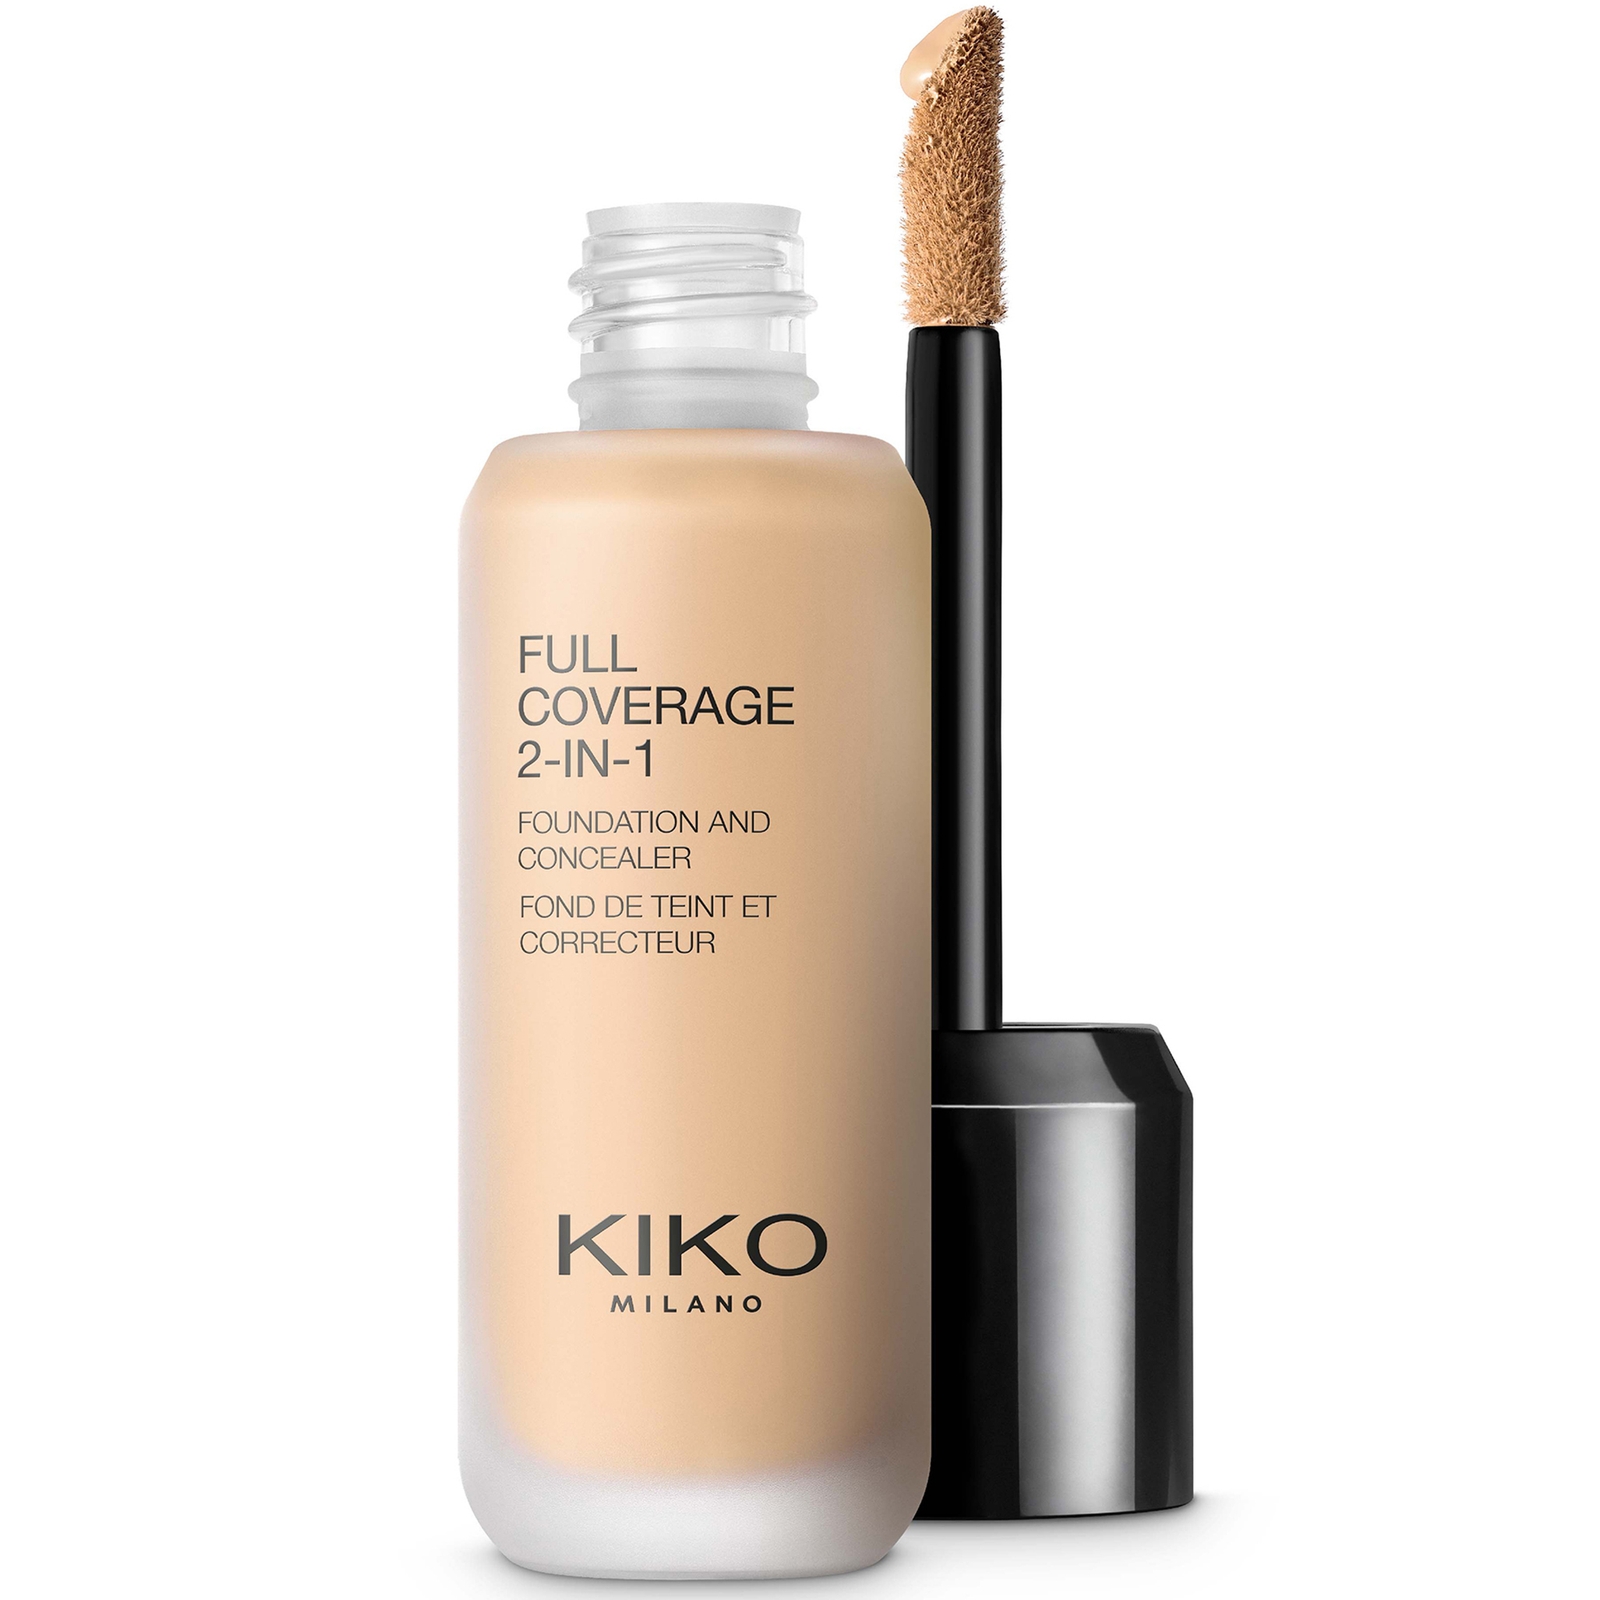 KIKO Milano Full Coverage 2-in-1 Foundation and Concealer 25ml (Various Shades) - 15 Warm Beige